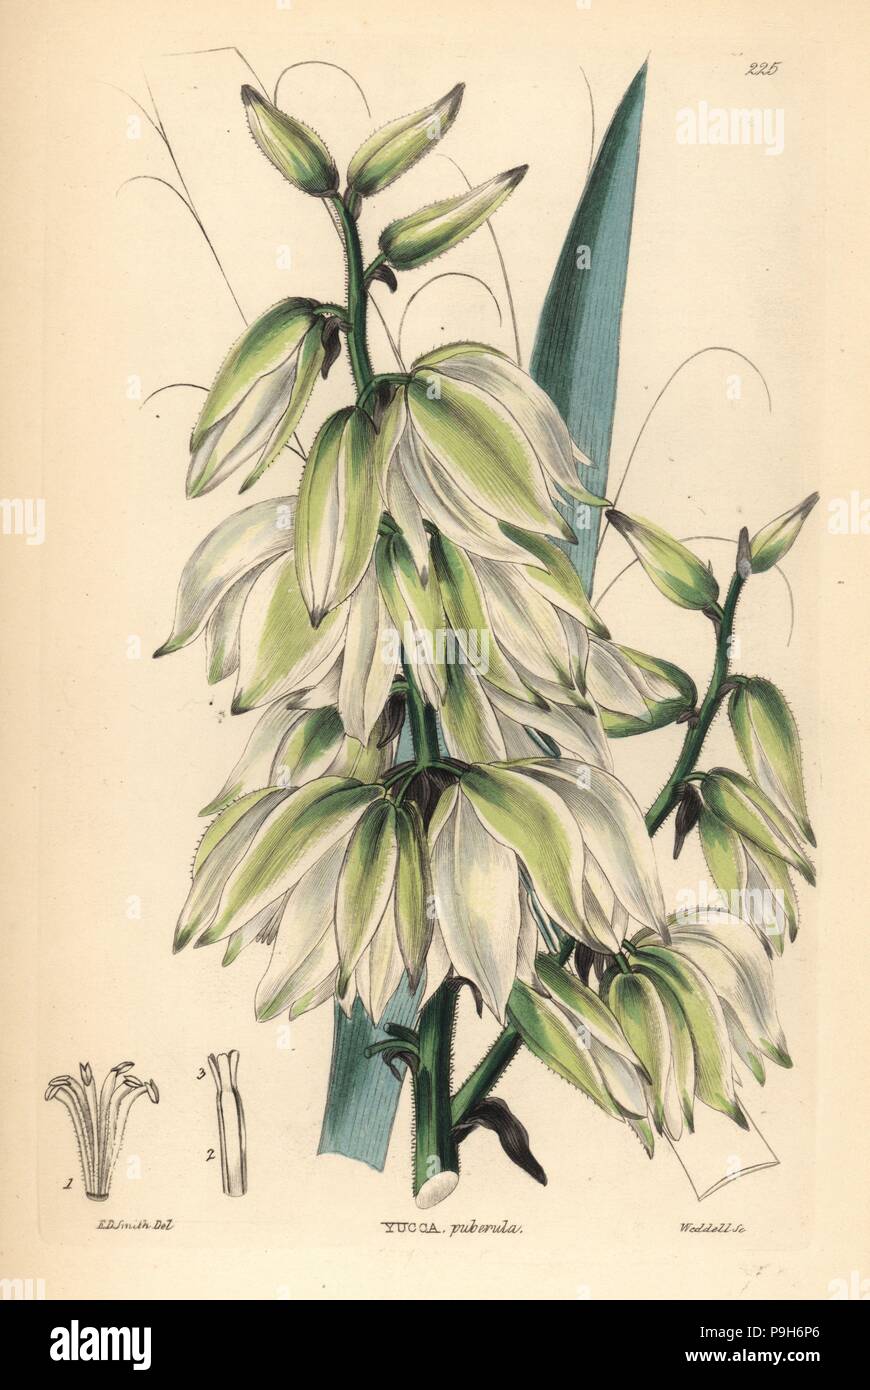 Adam's needle or needle palm, Yucca flaccida (Downy Adam's needle, Yucca puberula). Handcoloured copperplate engraving by Weddell after Edwin Dalton Smith from John Lindley and Robert Sweet's Ornamental Flower Garden and Shrubbery, G. Willis, London, 1854. Stock Photo